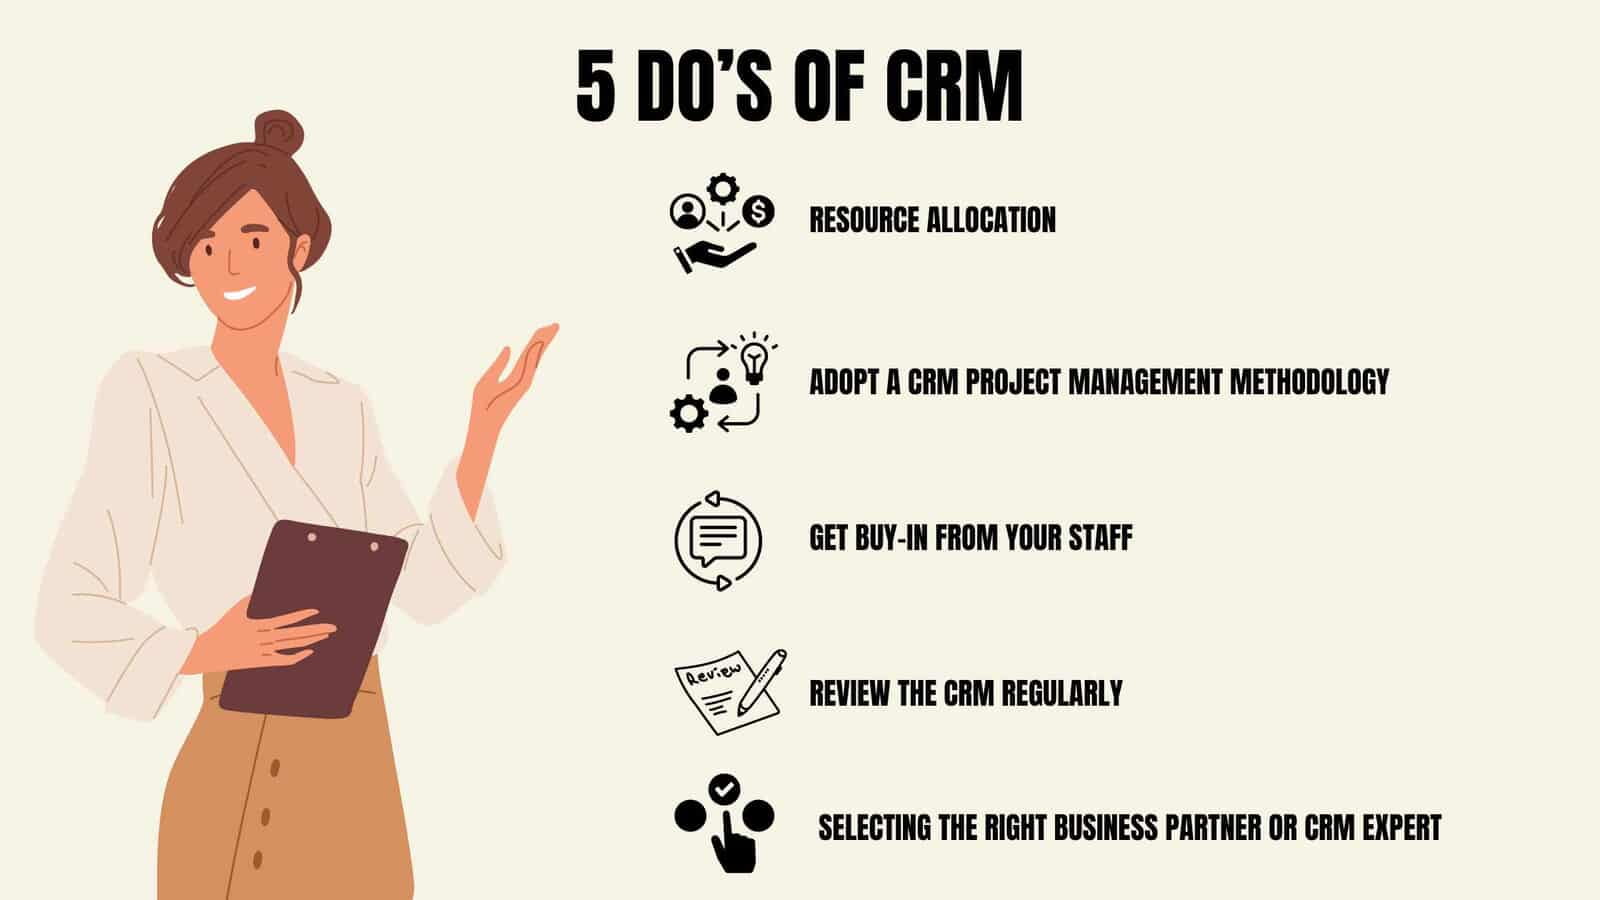 5 Do's of CRM